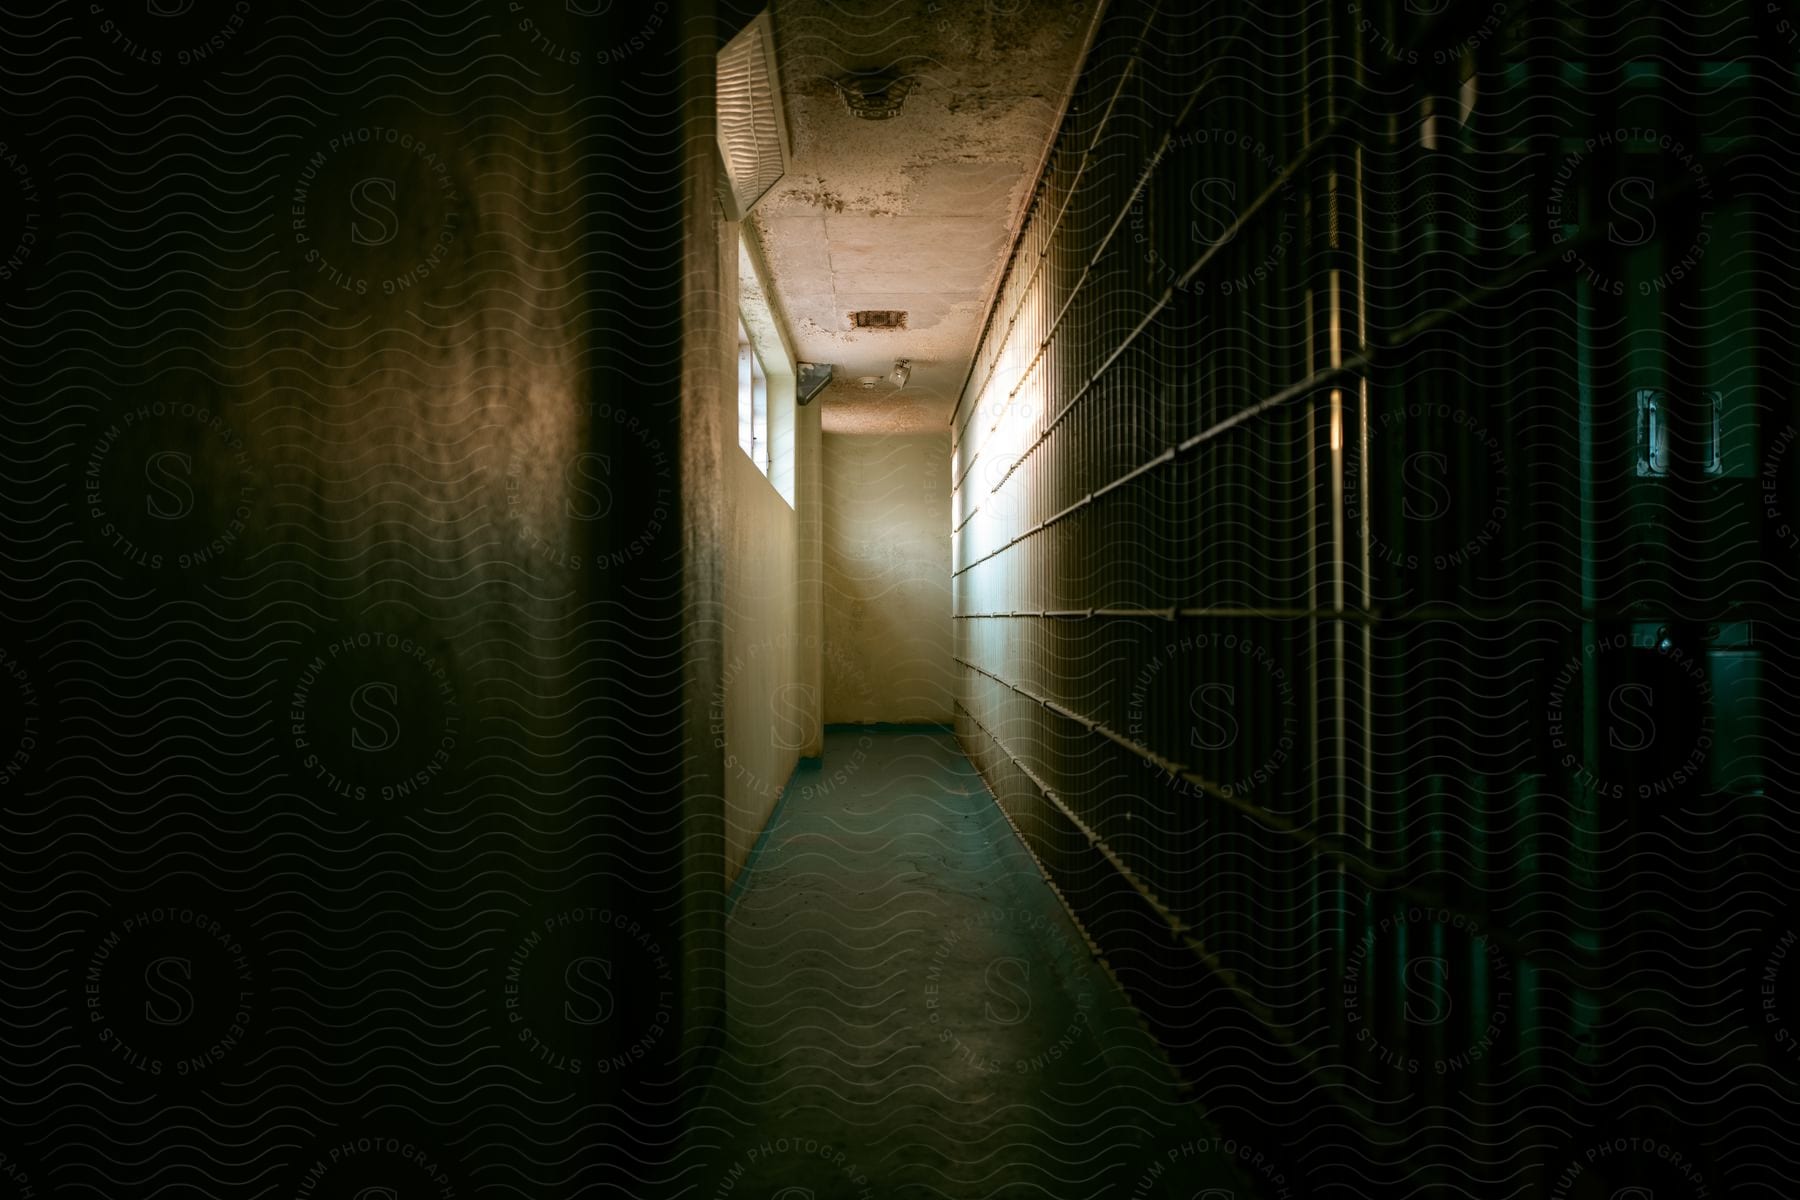 Jailhouse hallway corridor with cell block bars on one side